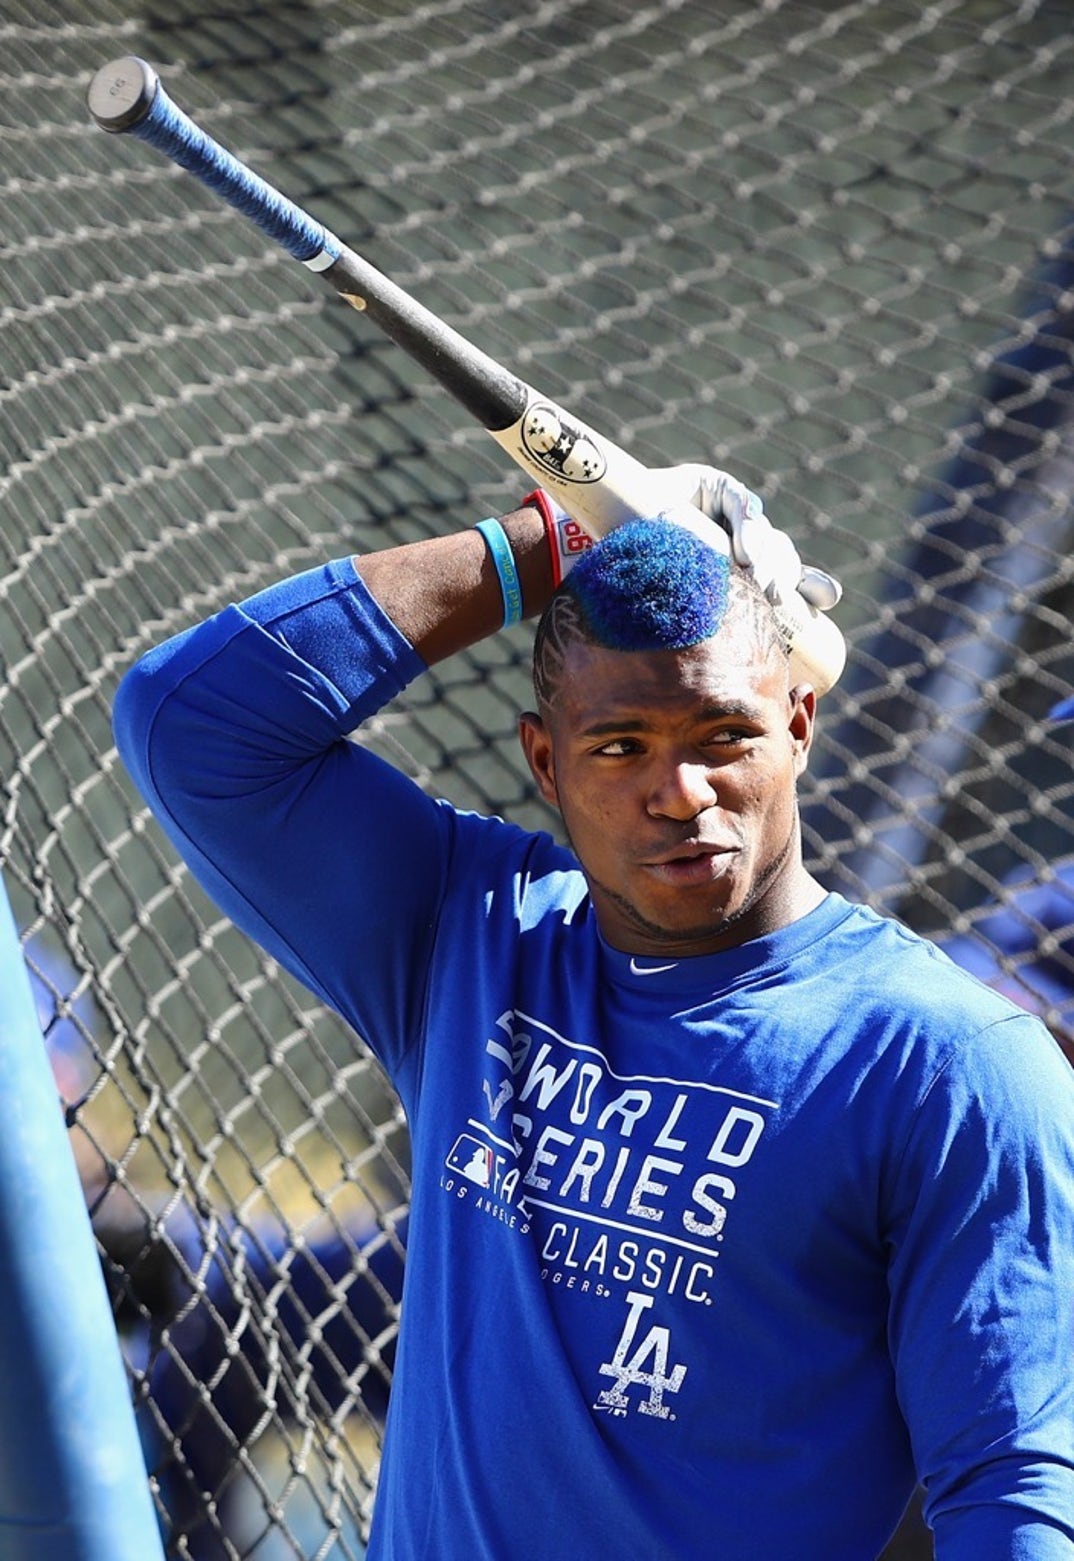 Yasiel Puig Busts Out Blue Hair for World Series